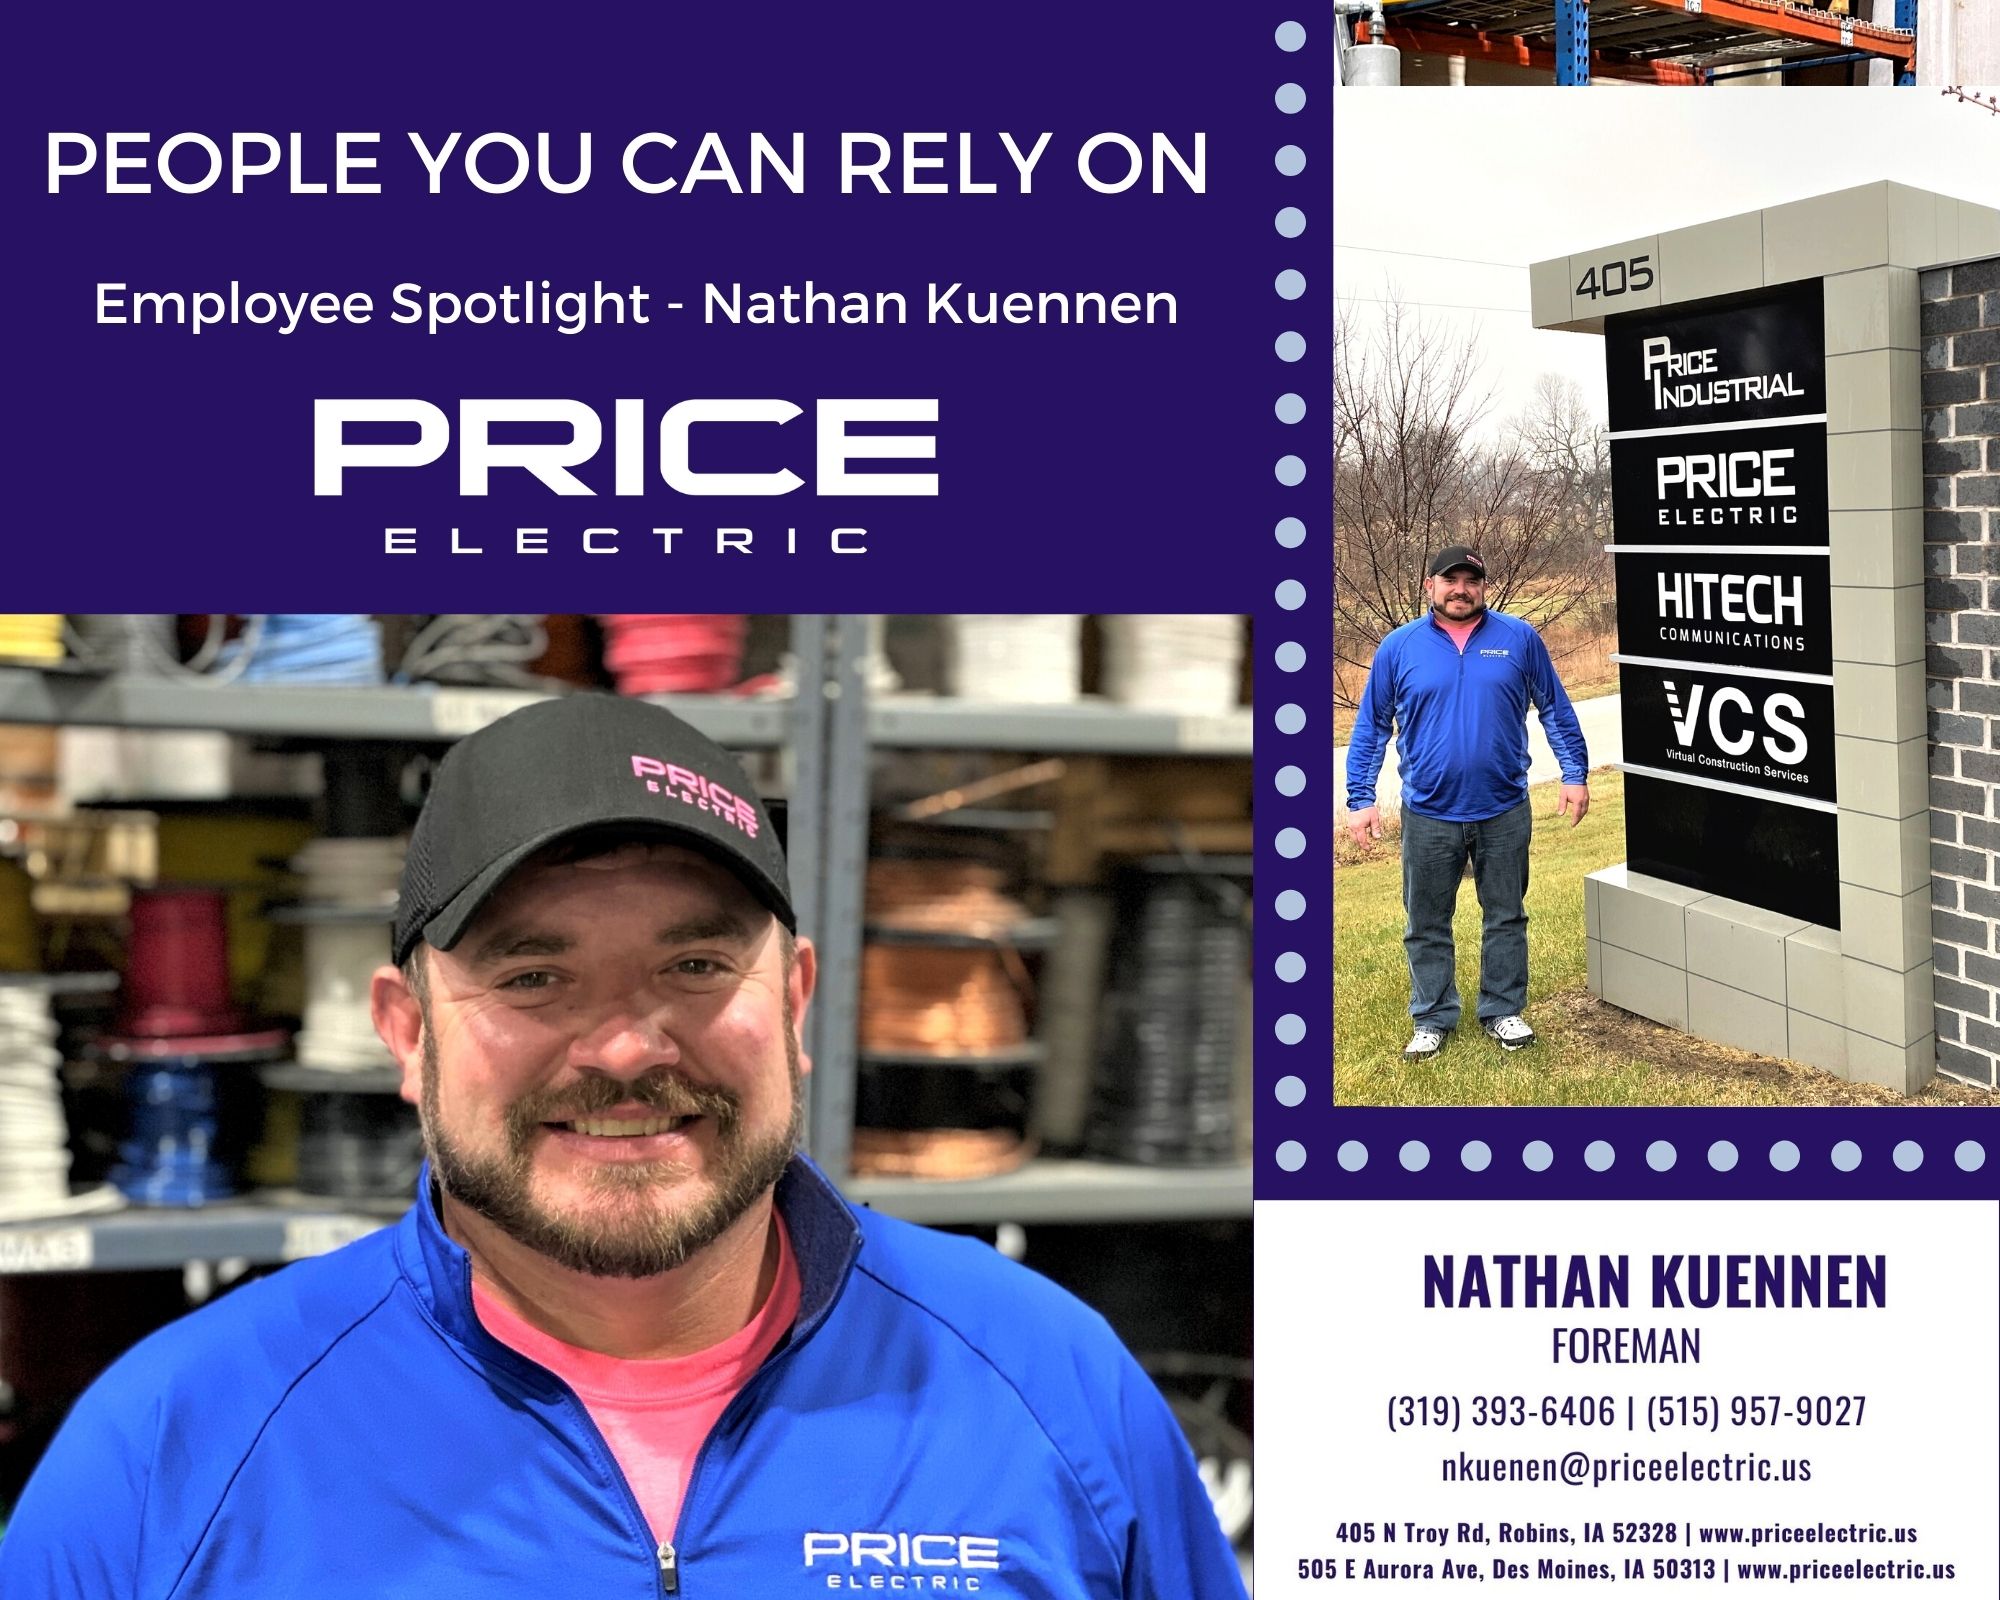 Meet Price Electric's Large Project Foreman